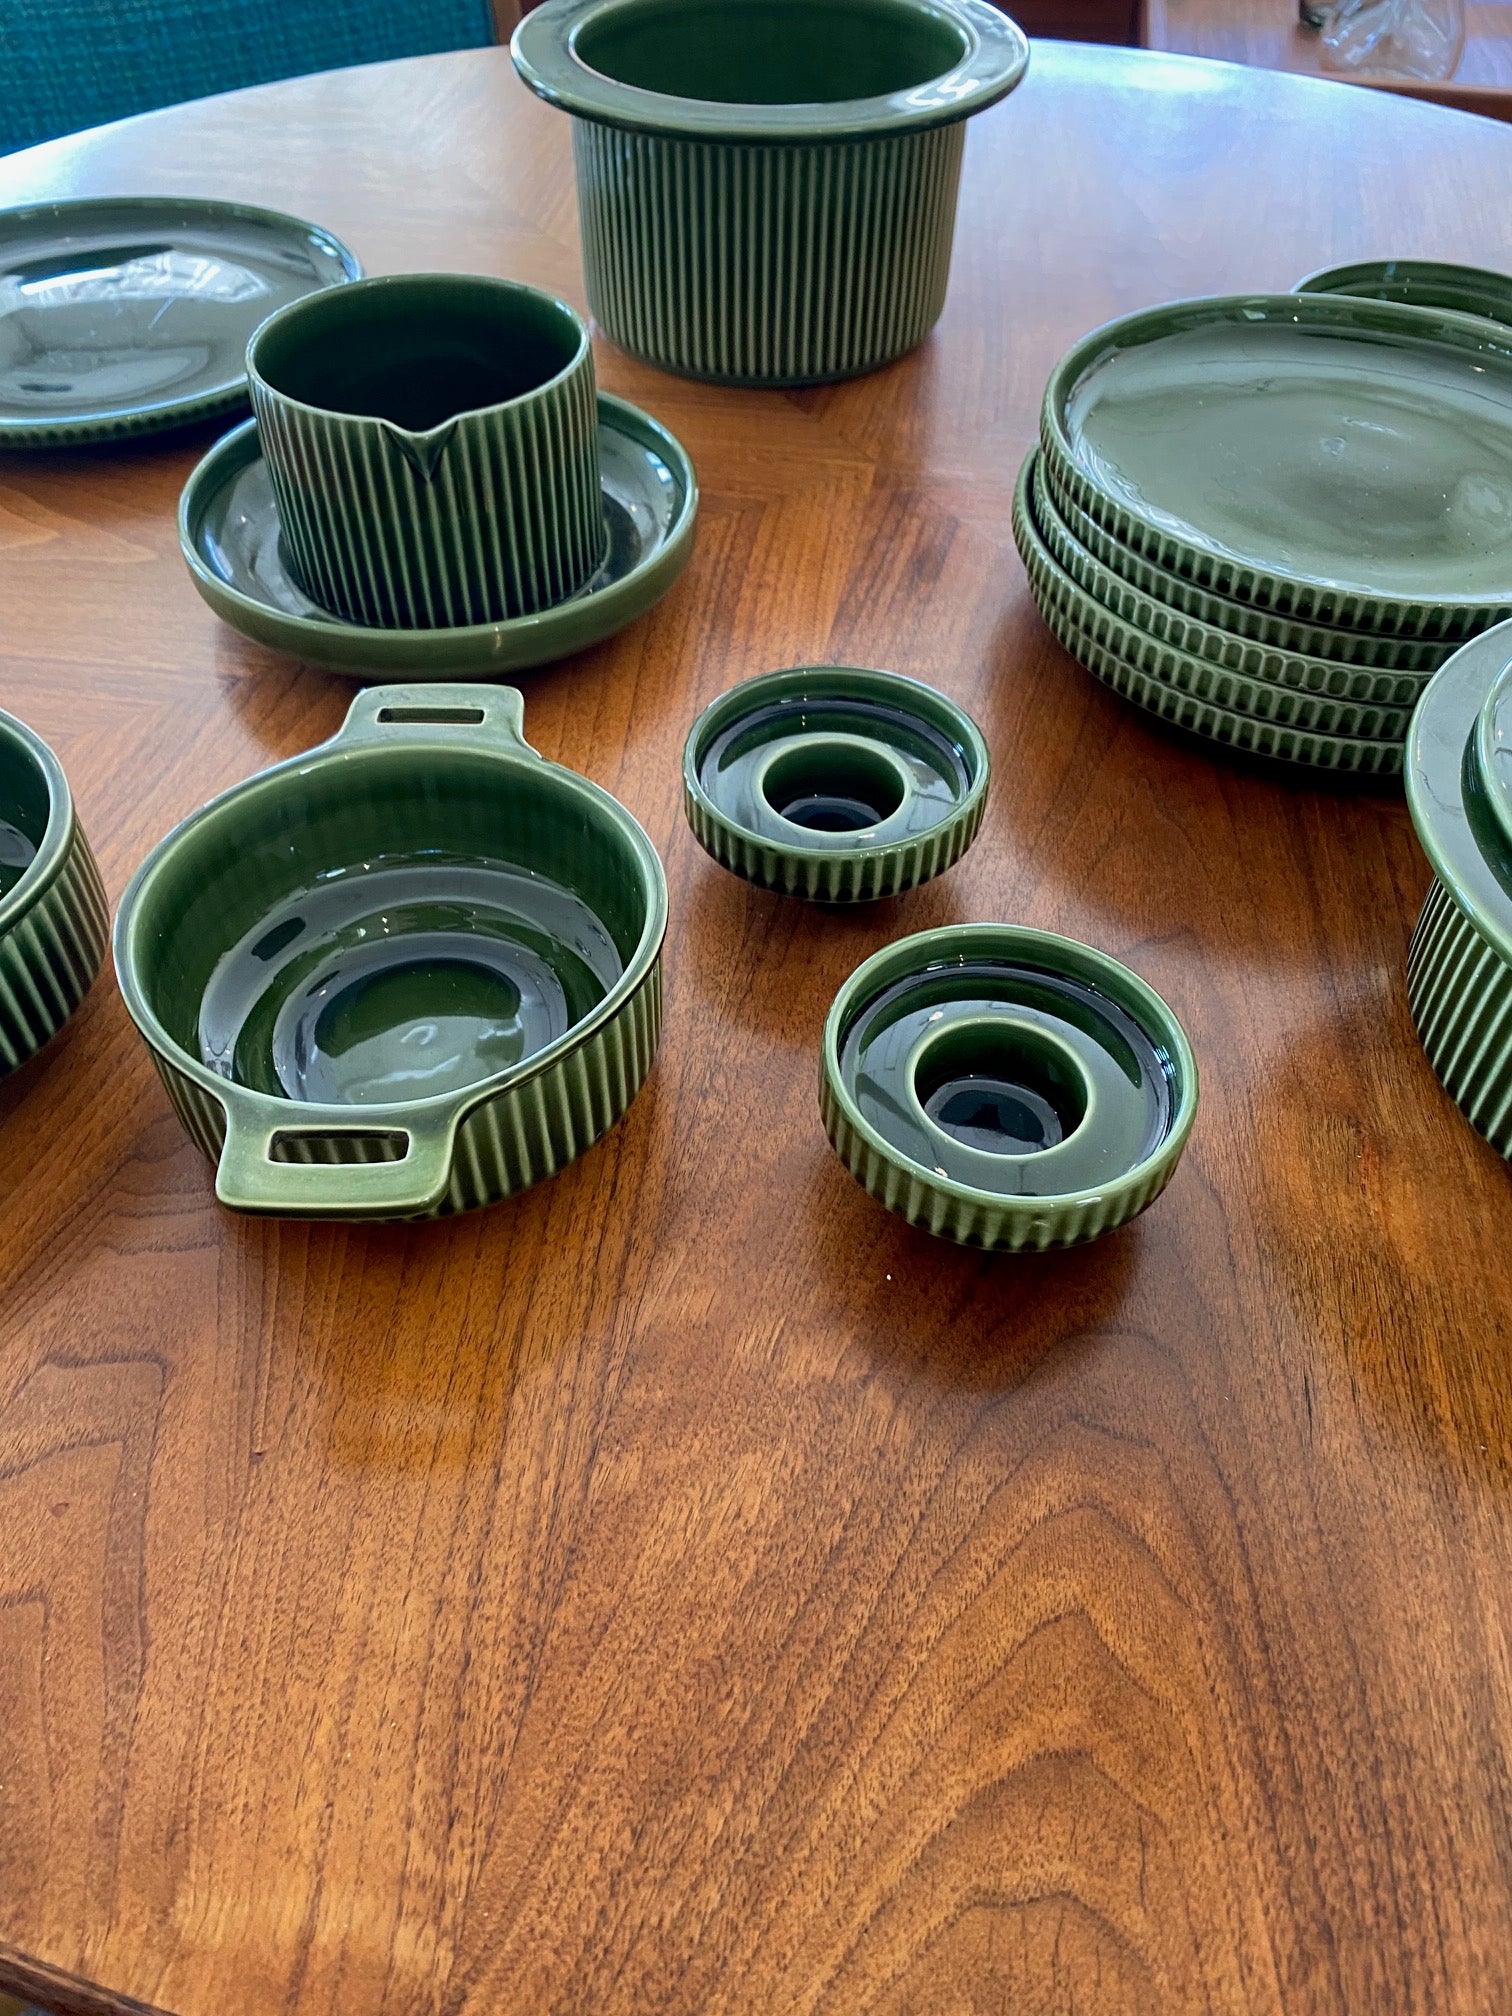 Cande holders from our Set of mid-century pottery designed by Fokke Hamming for De Driehoek. Dark forest green glaze with a modern striated design. Made in Huizen in Holland- Cook Street Vintage